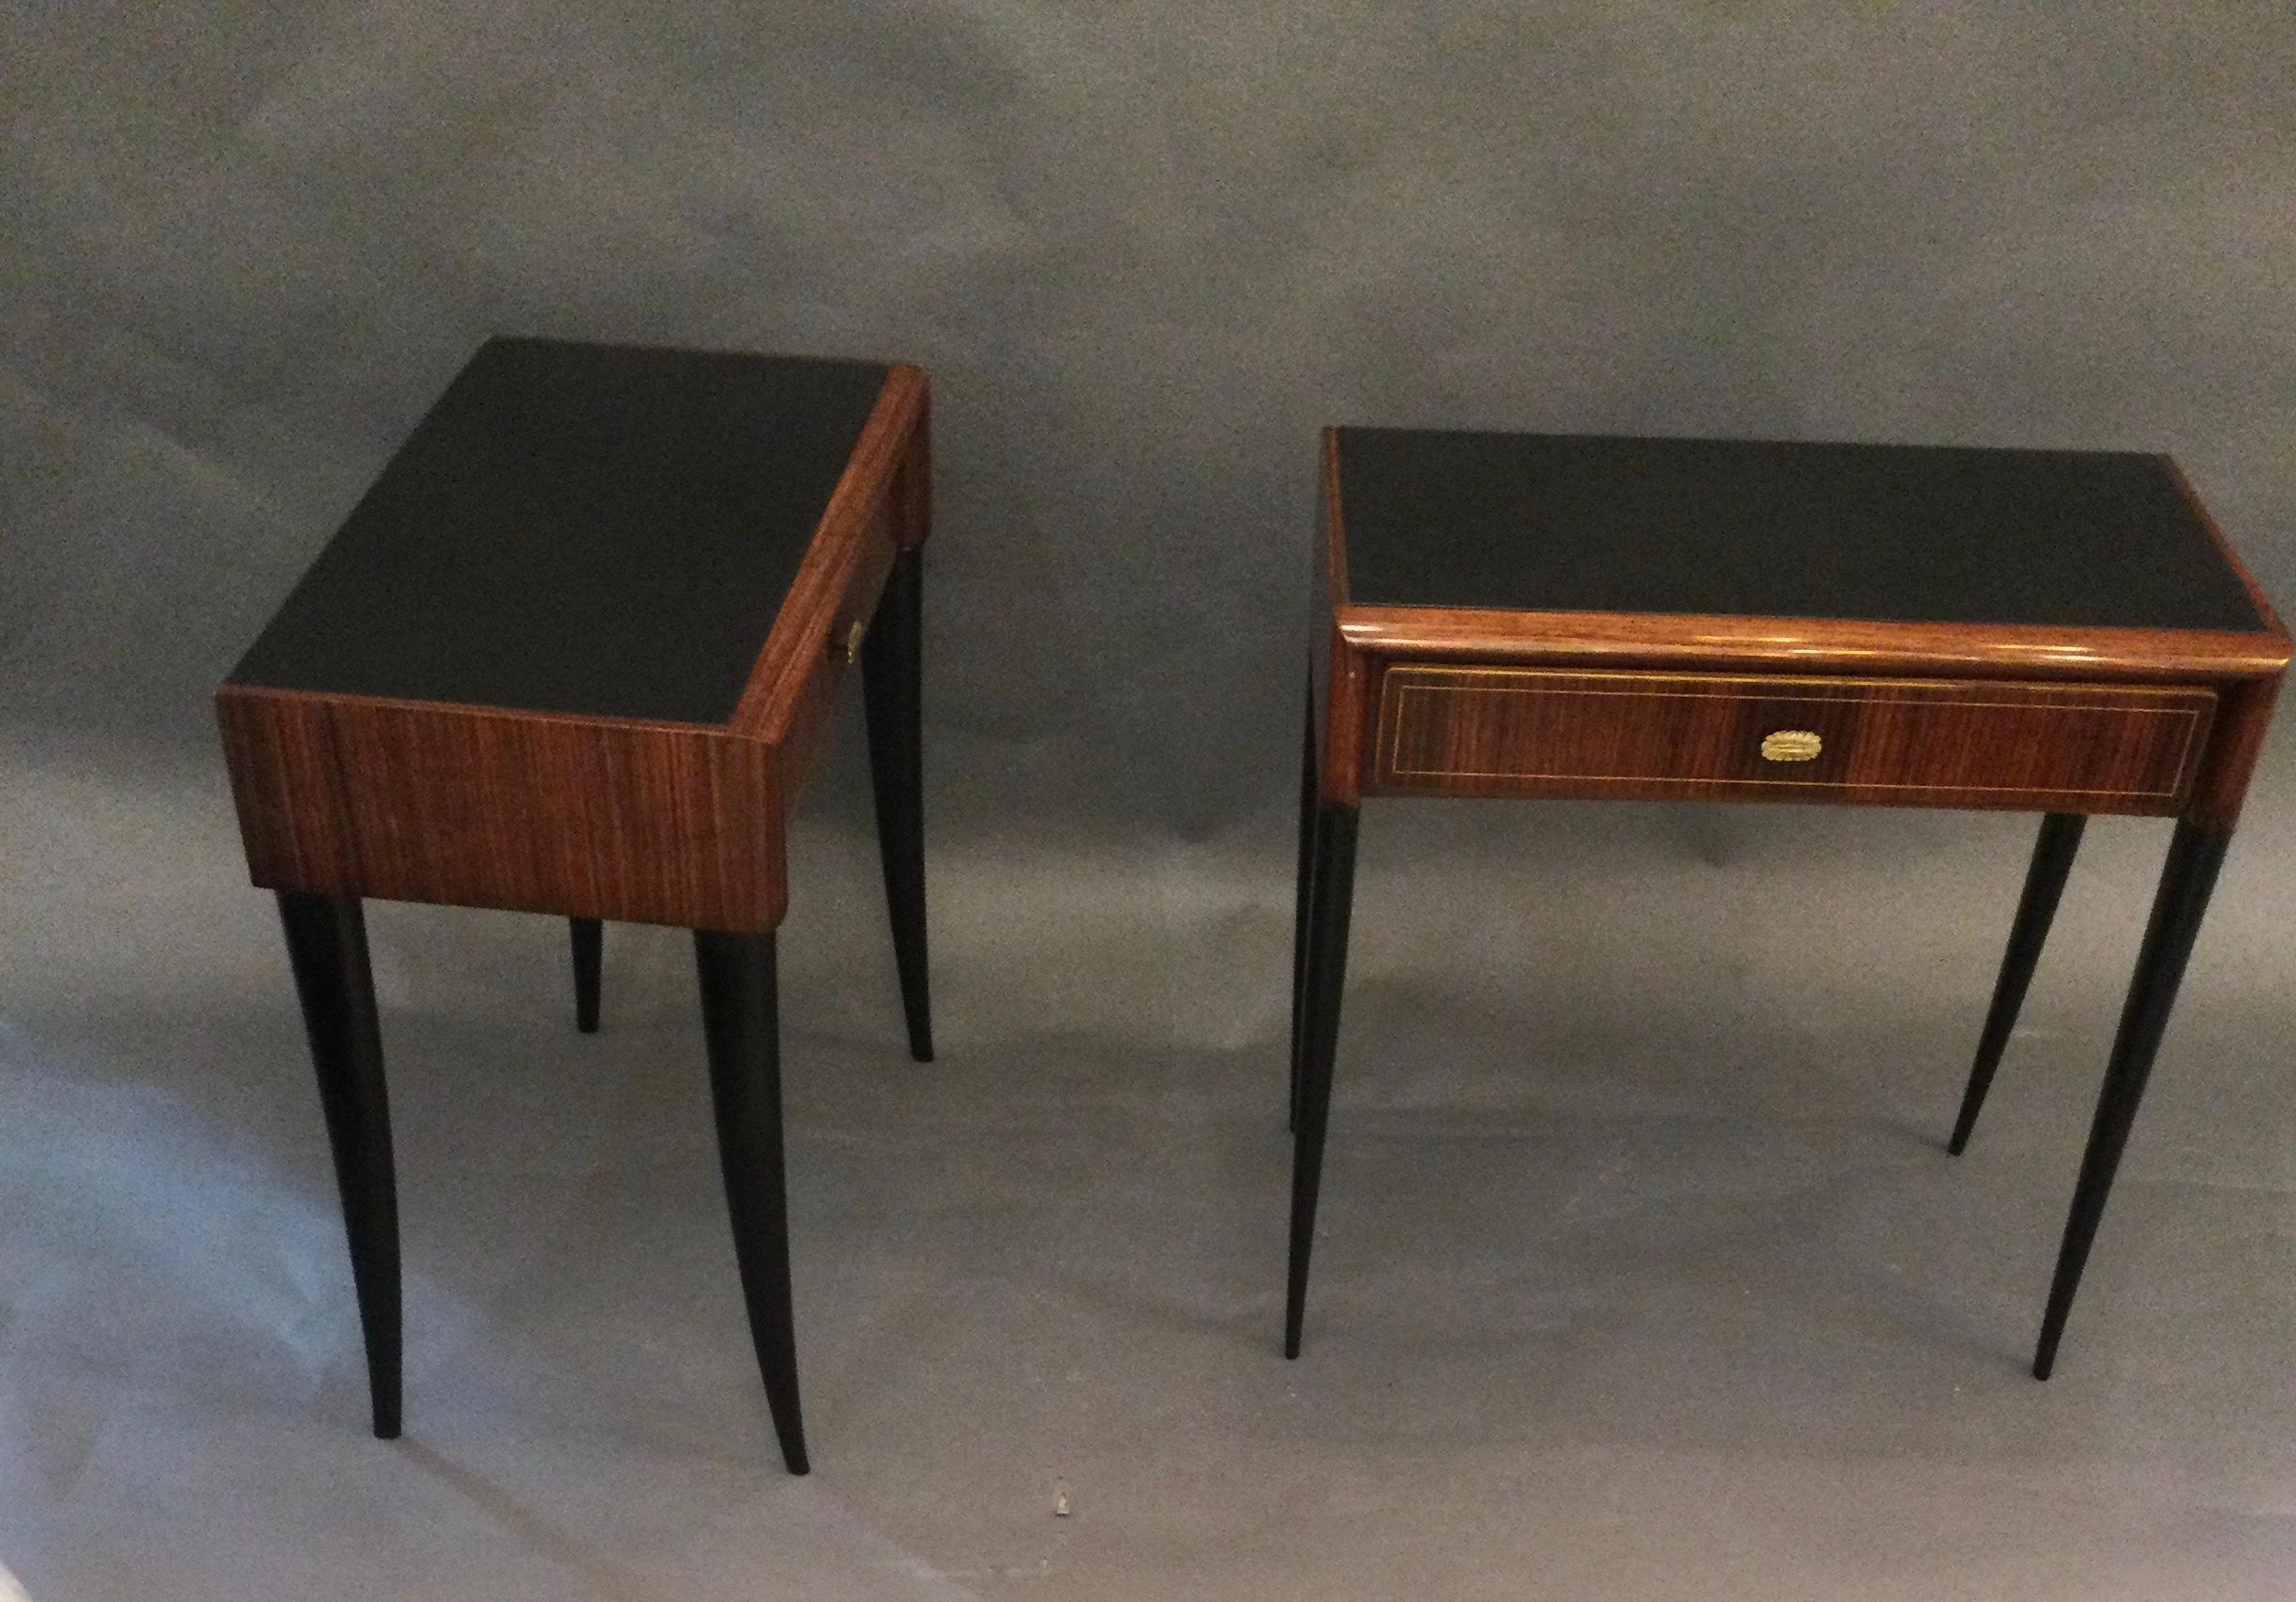 An elegant pair of hand crafted side tables. Drawers with brass handles, fantastic marquetry made of walnut, 
black glass top and ebonized legs.
Attributed to Gio Ponti.